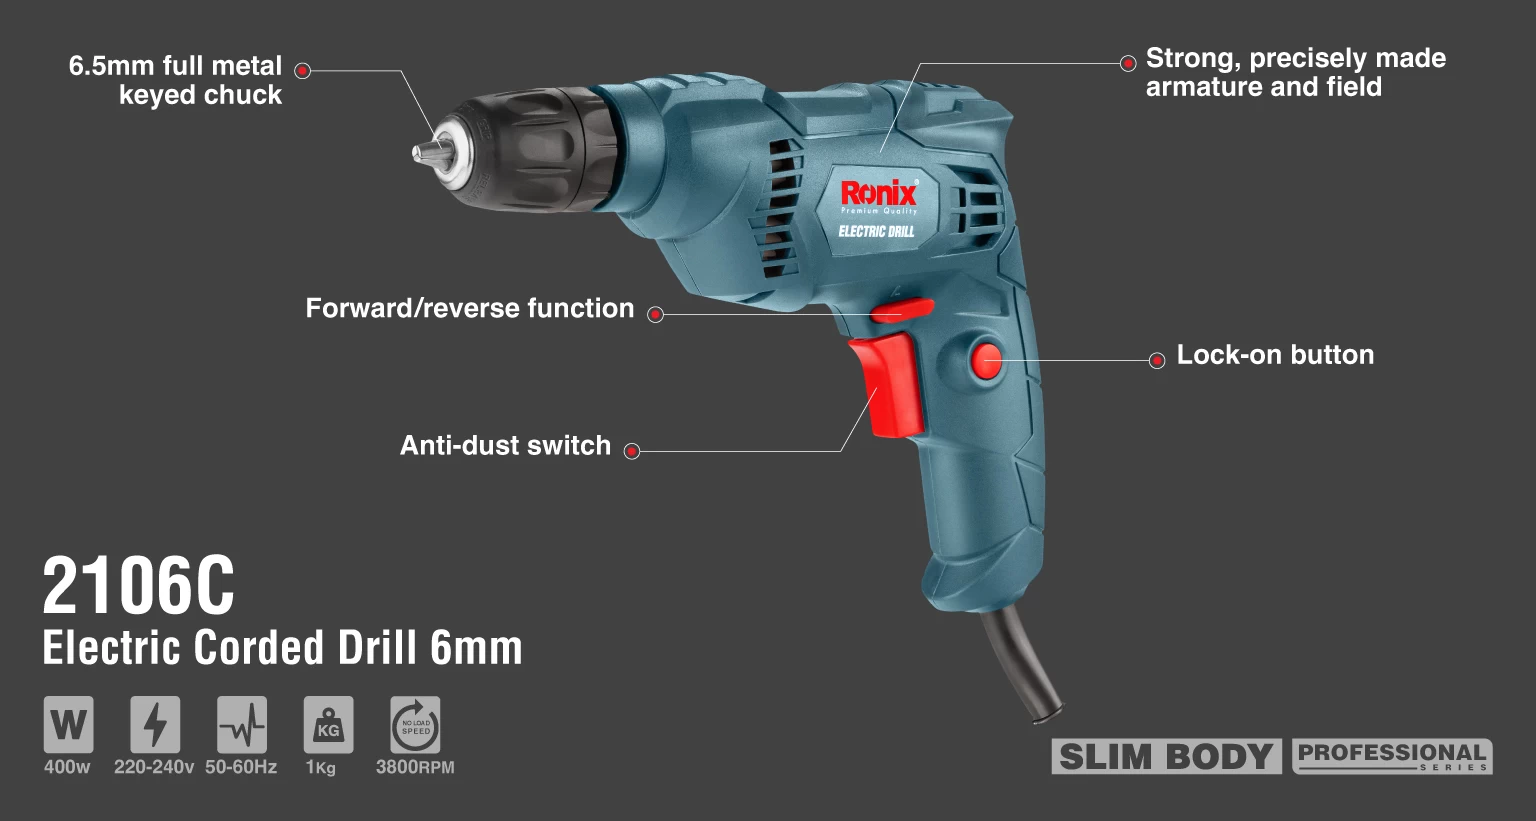 electric corded drill 400w keyless chuck_details